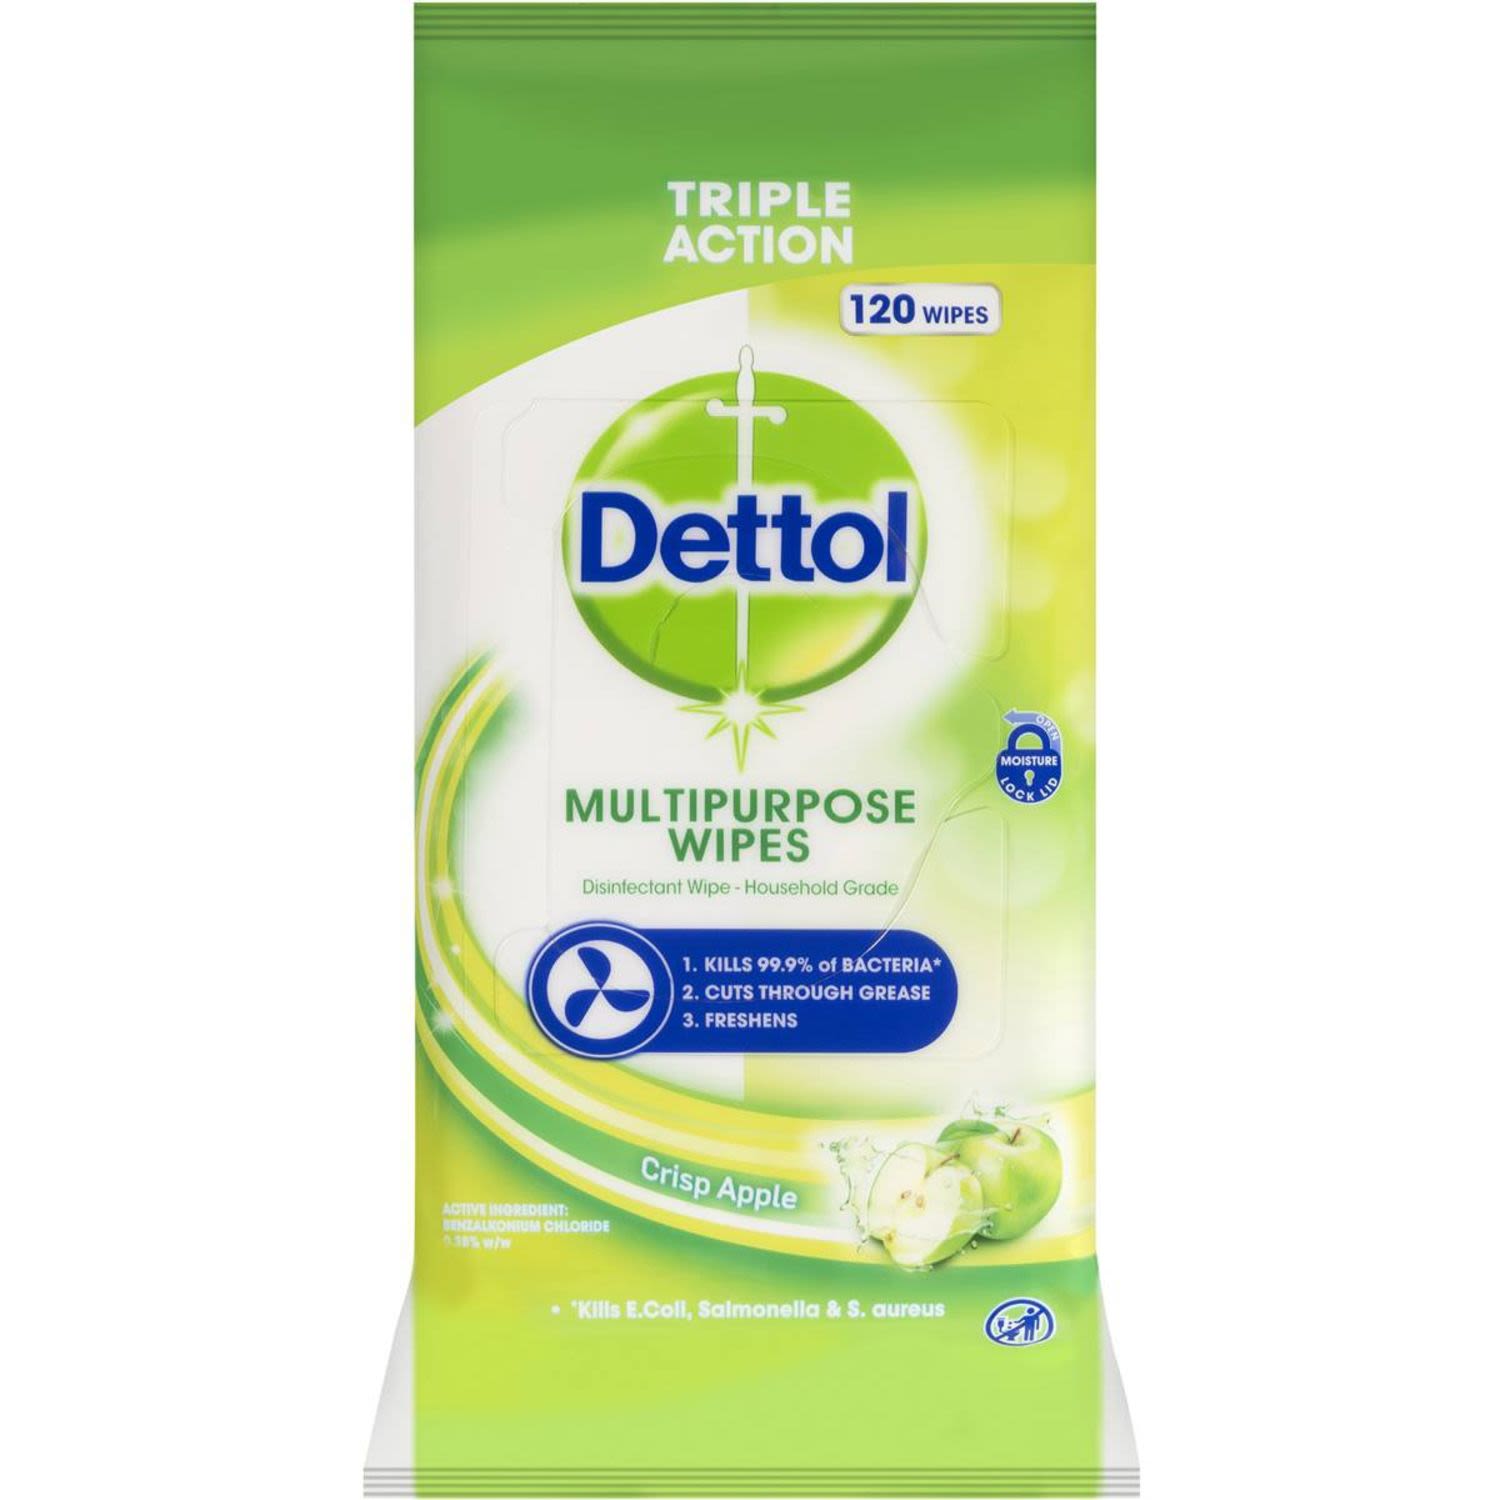 Dettol Antibacterial Disinfectant Cleaning Wipes Crisp Apple, 120 Each